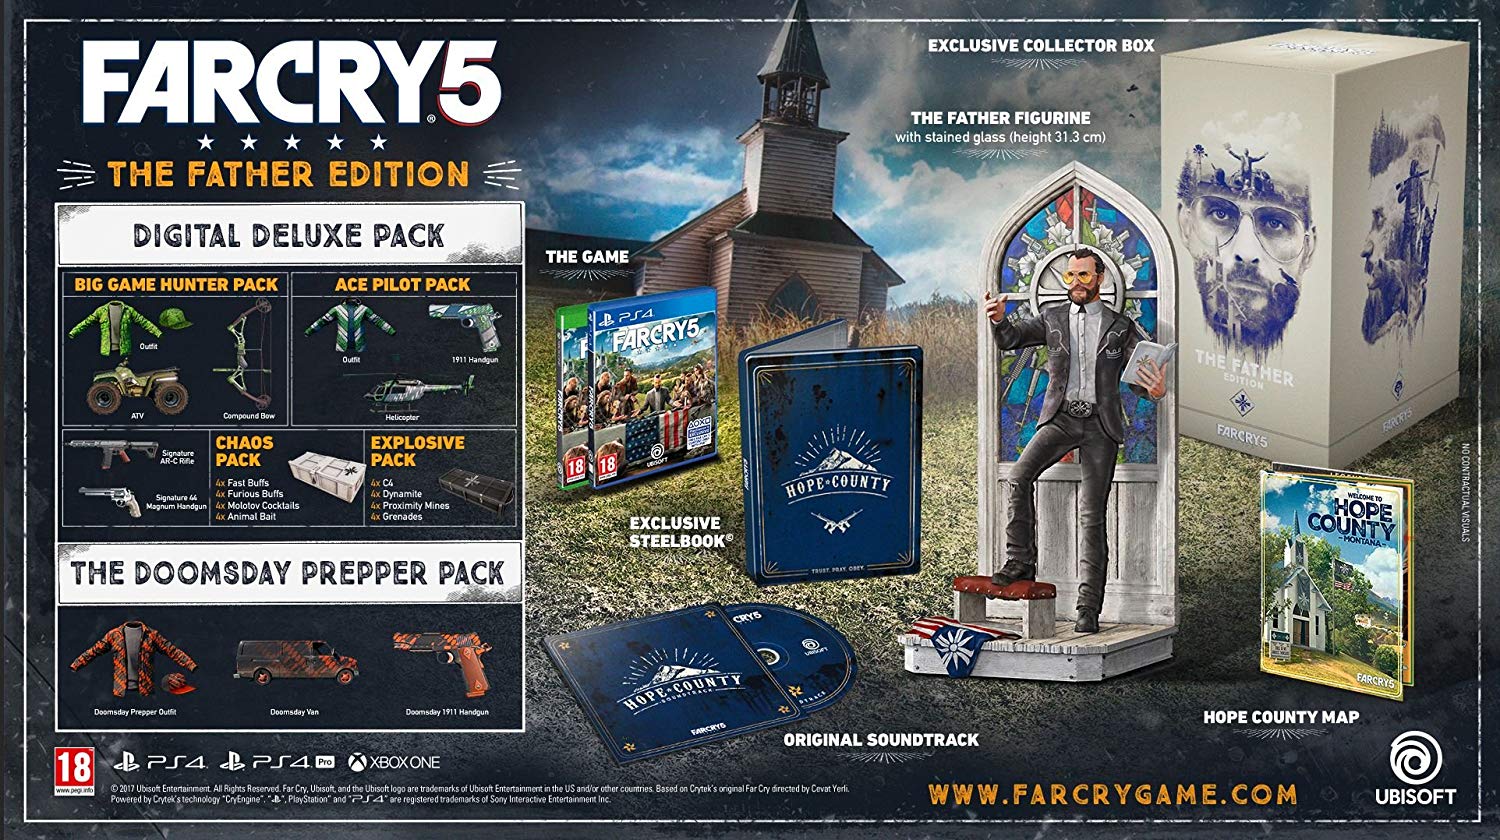 Limited Edition, Far Cry Wiki